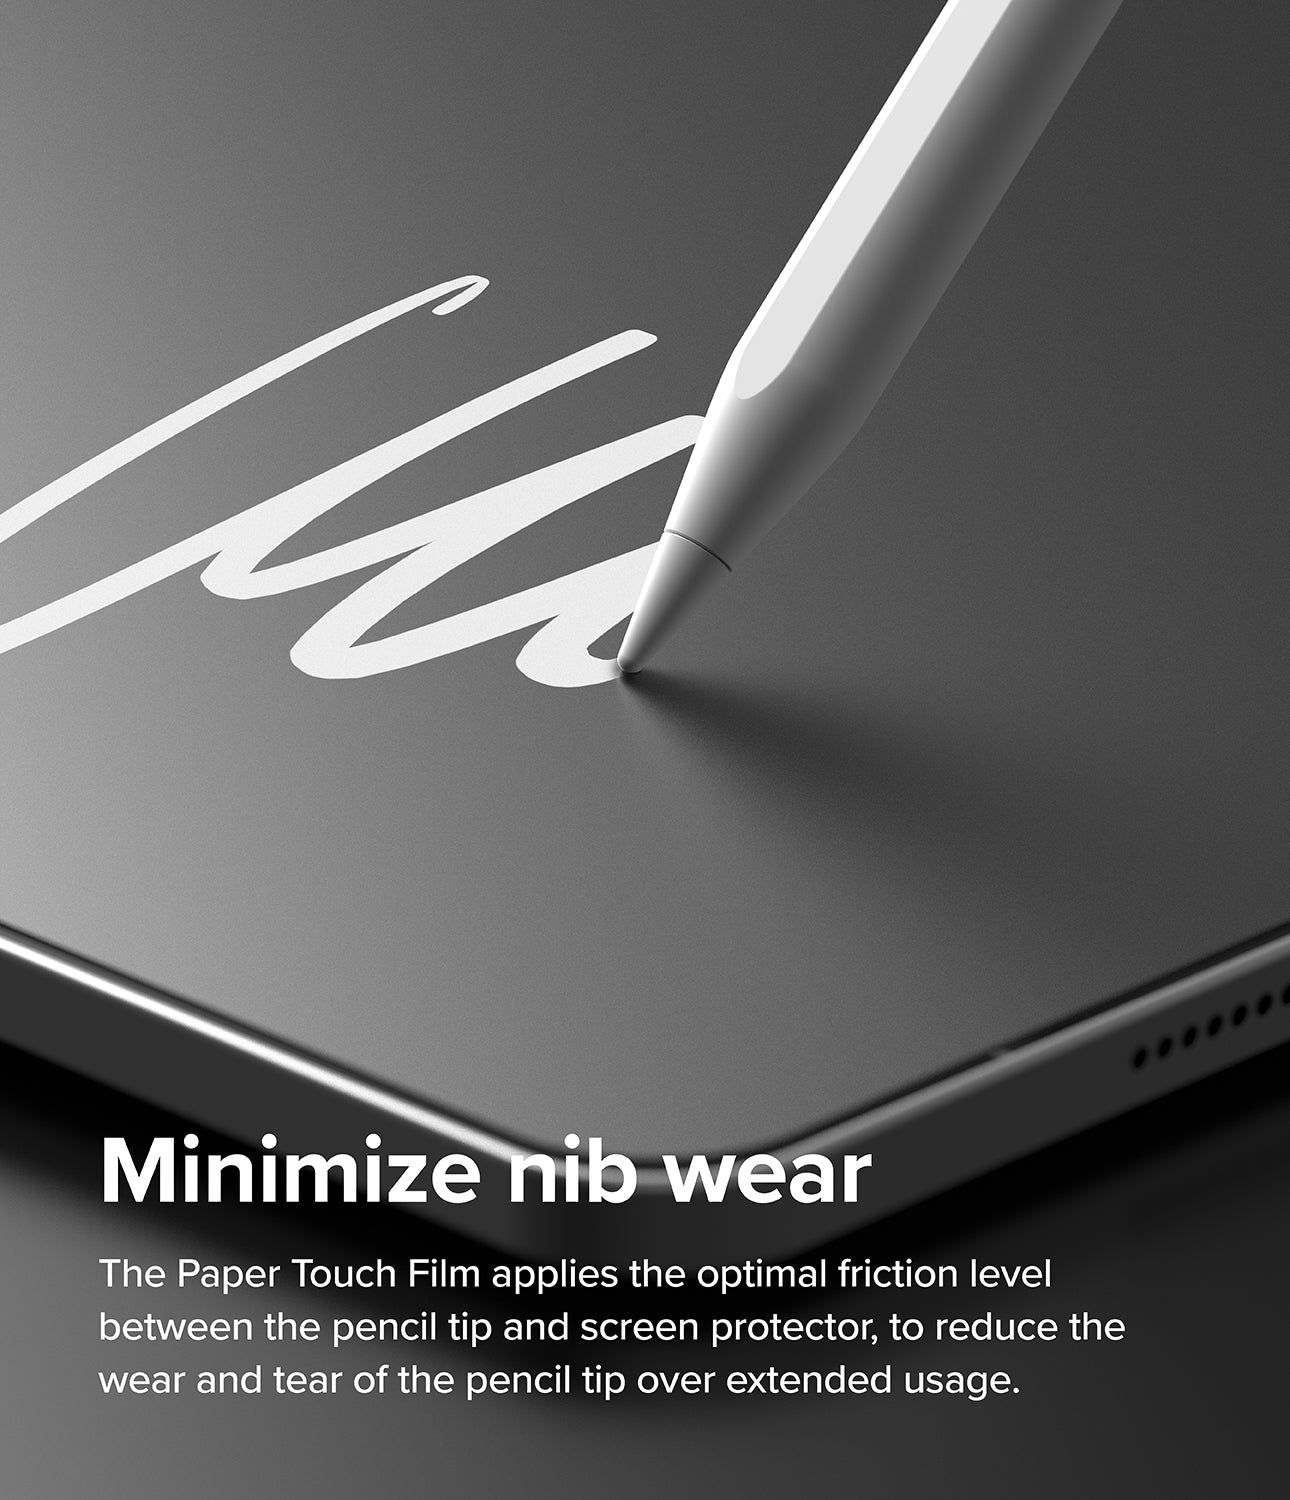 iPad Pro 11" (M4) Screen Protector | Paper Touch Film - Soft - Minimize Nib Wear. The Paper Touch Film applies the optimal friction level between the pencil tip and screen protector, to reduce the wear and tear of the pencil tip over extended usage.